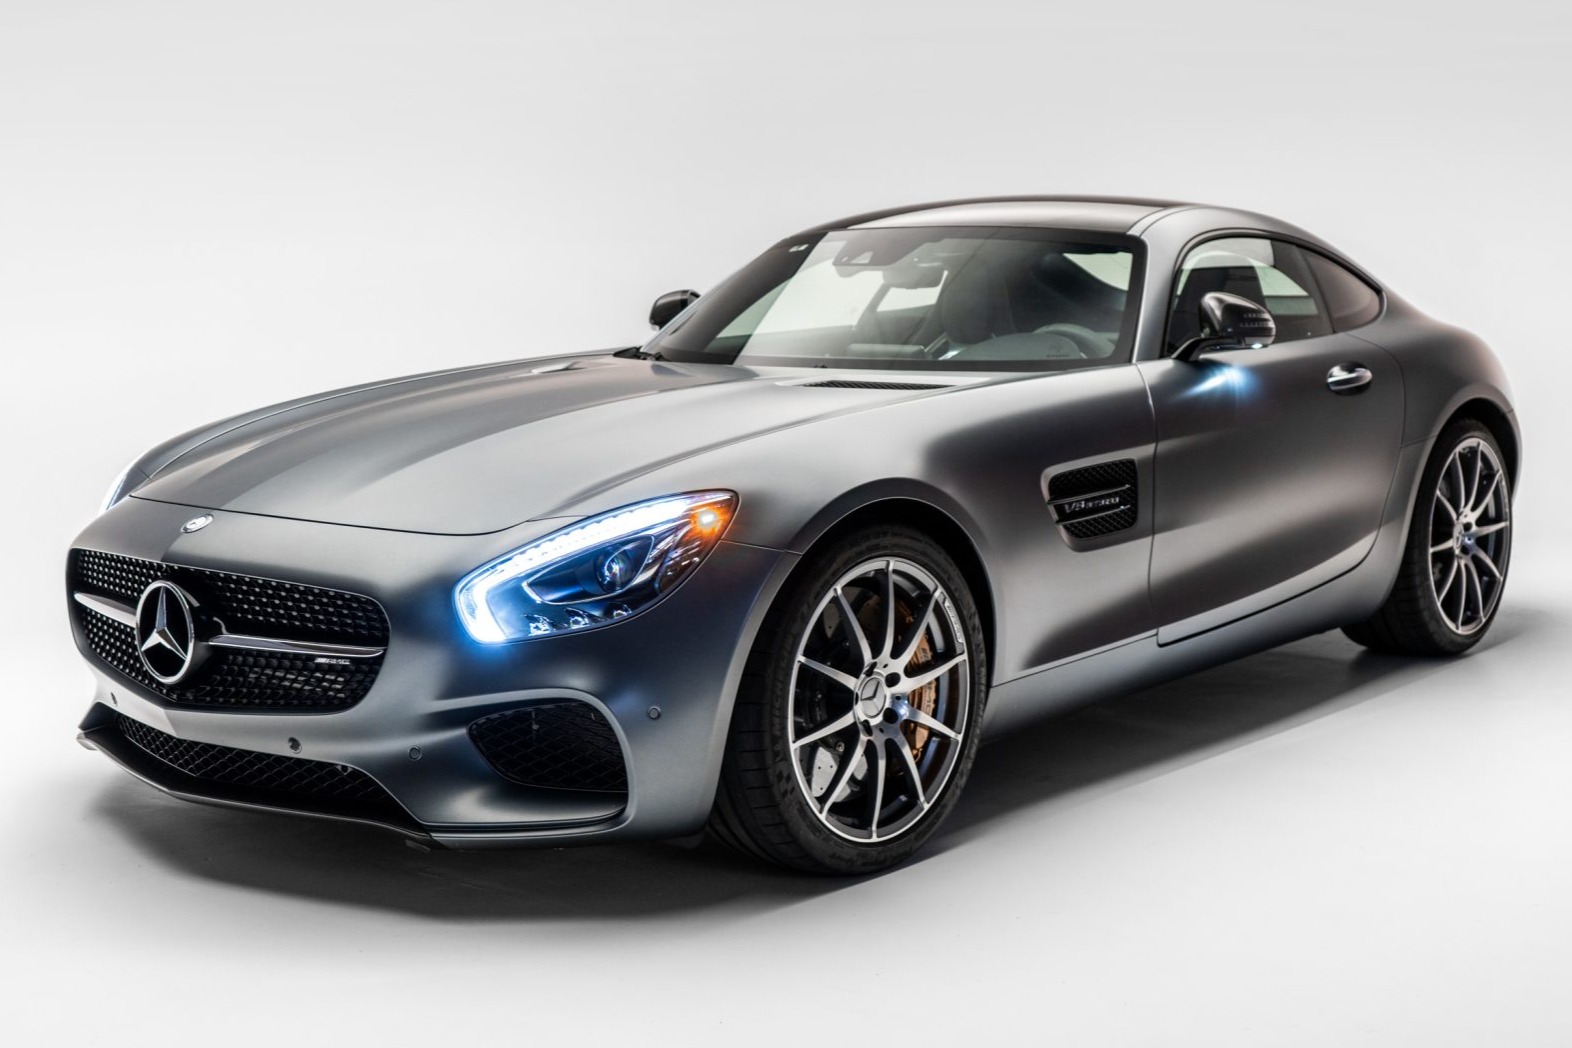 Used 15k-Mile 2016 Mercedes-AMG GT S Review